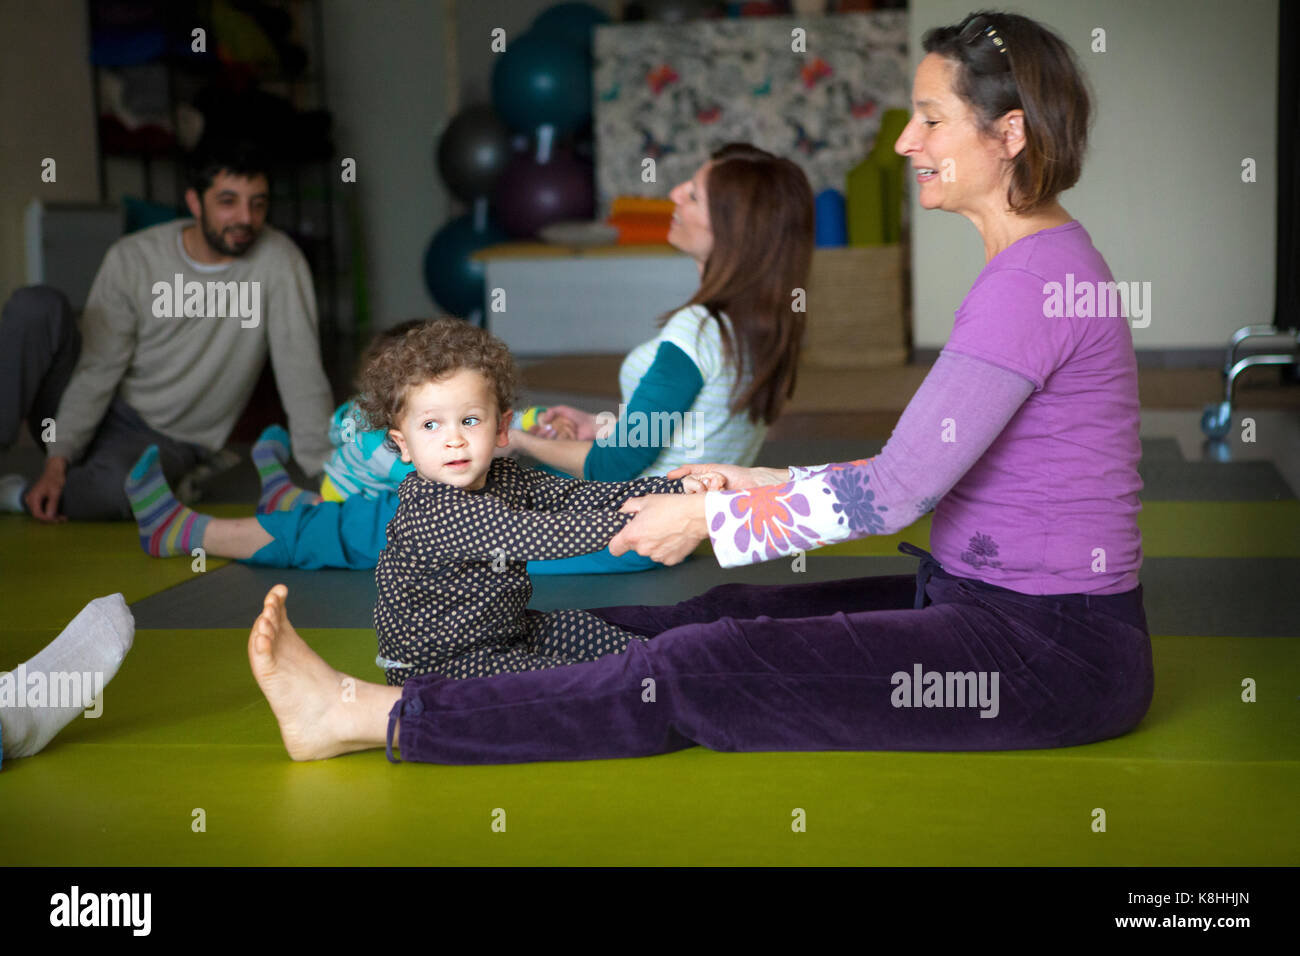 PARENT AND CHILD PRACTICING YOGA Stock Photo